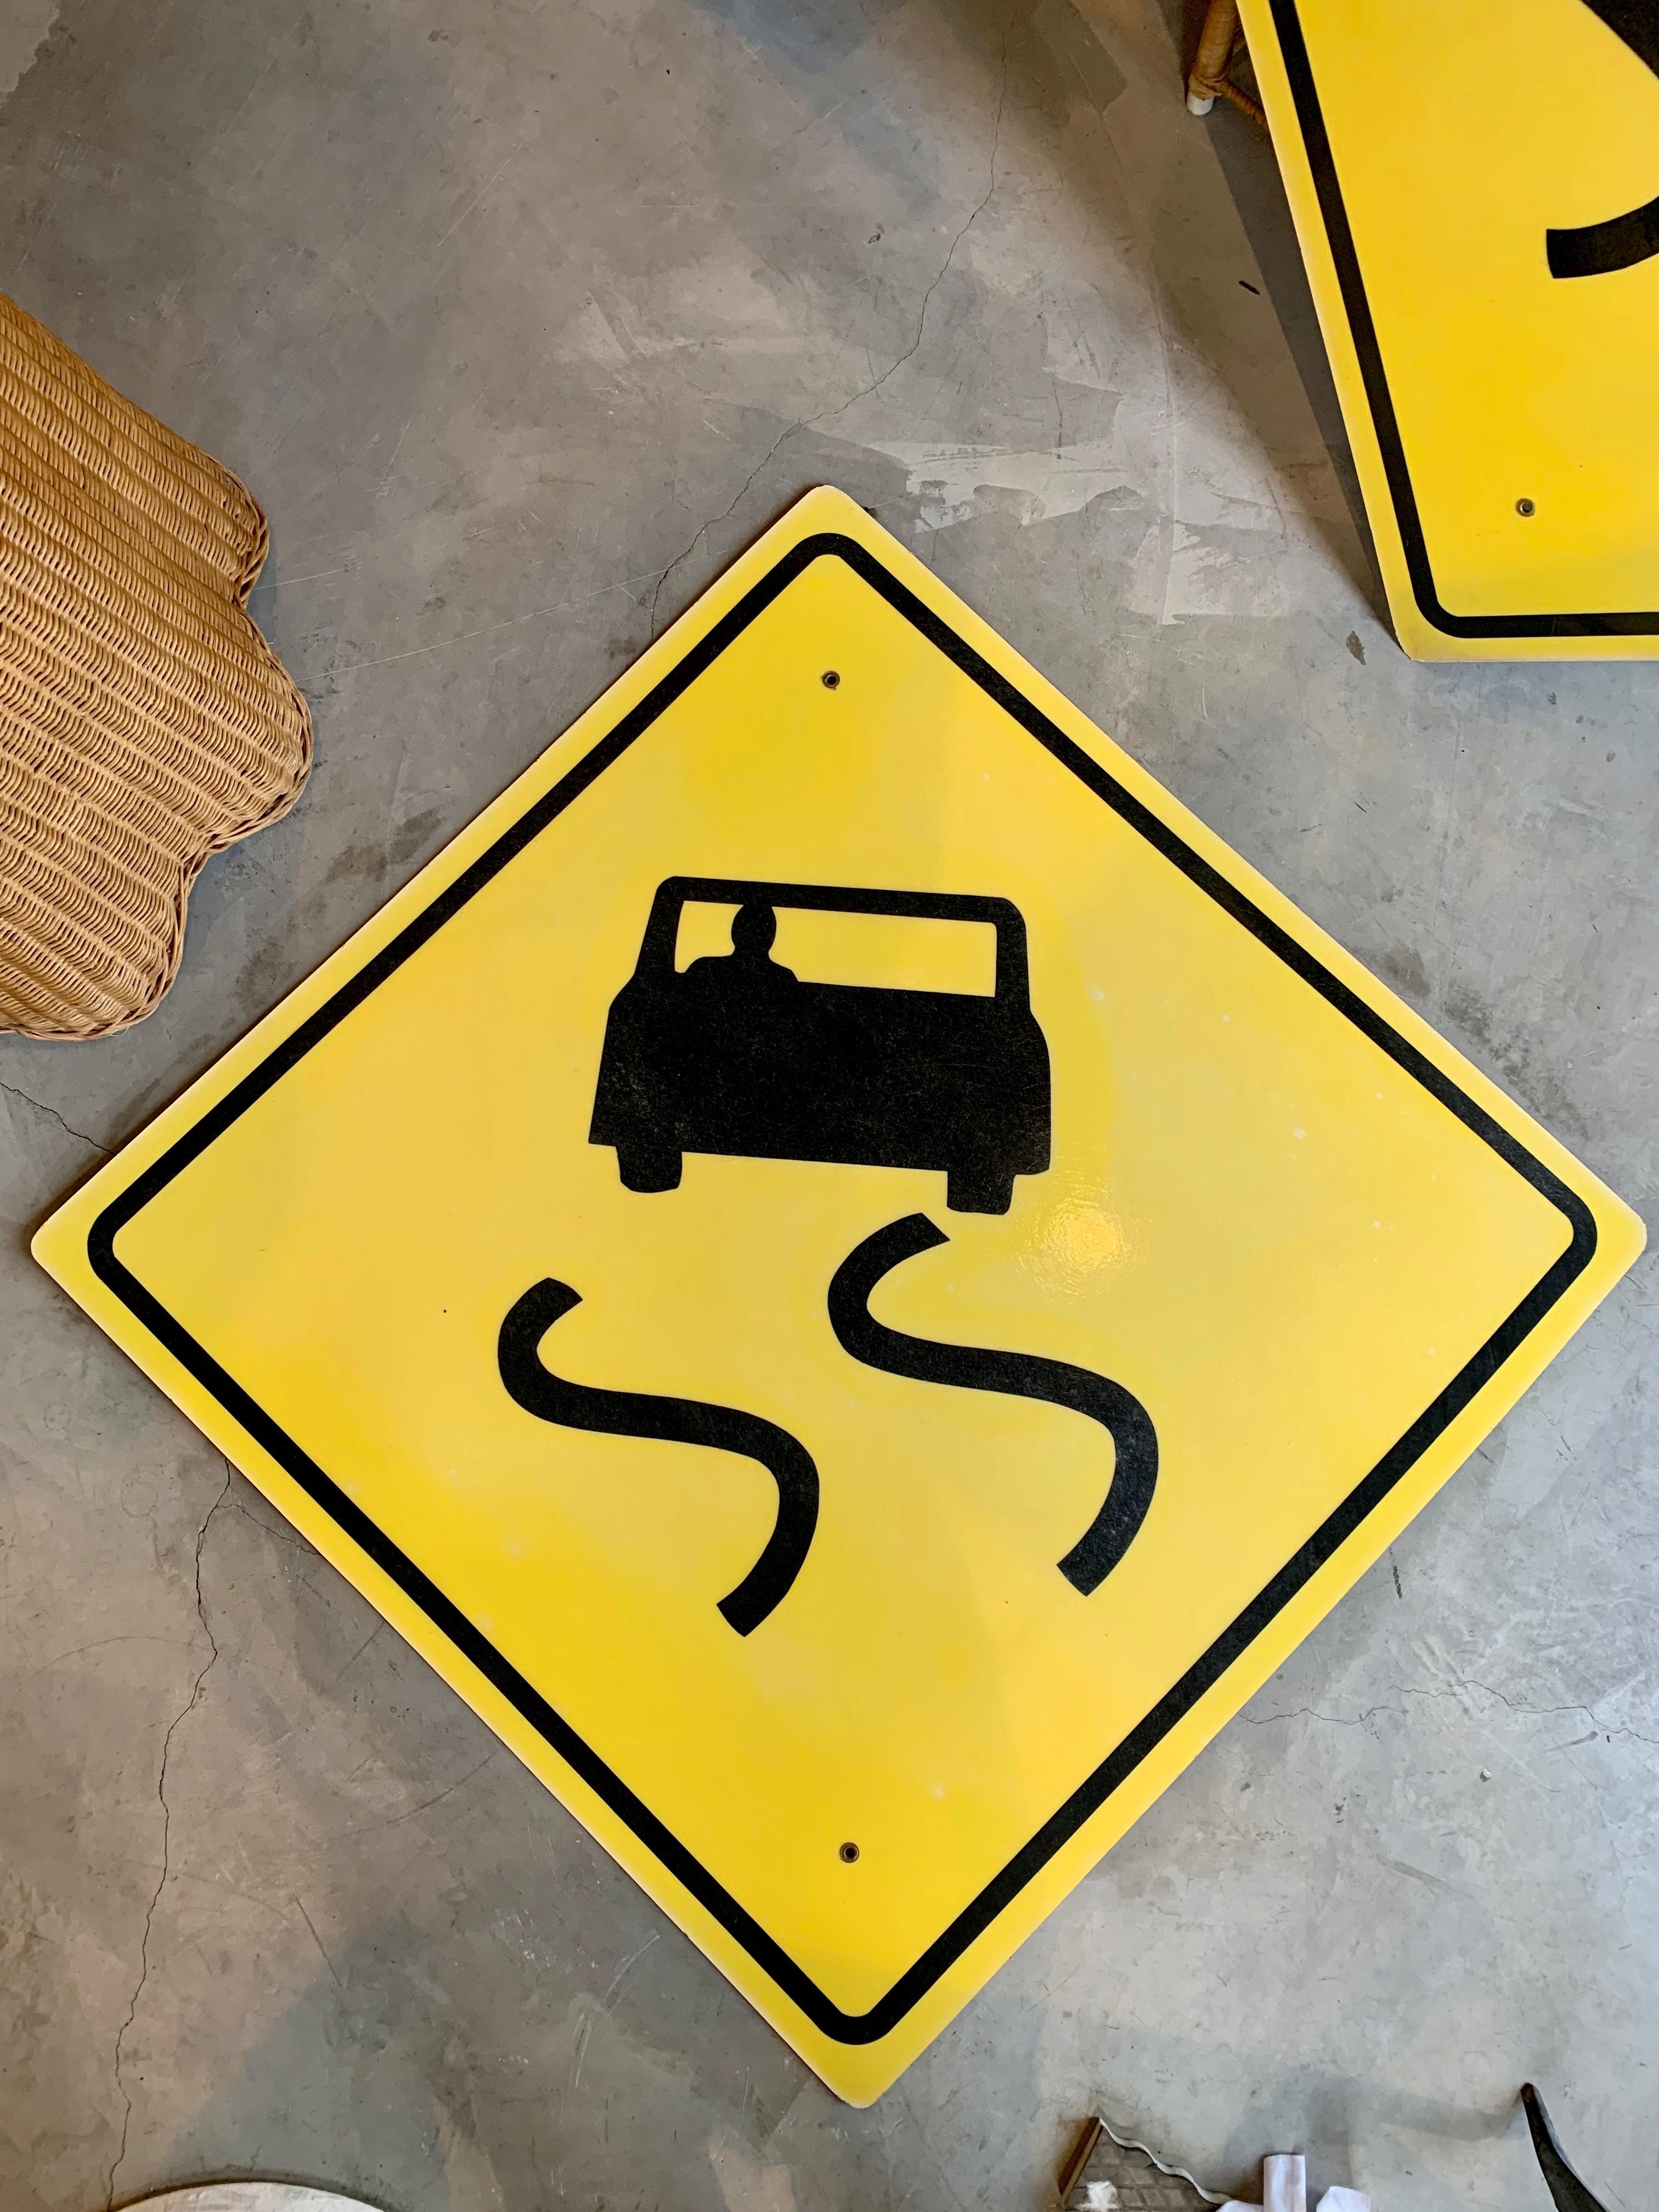 squiggly road sign